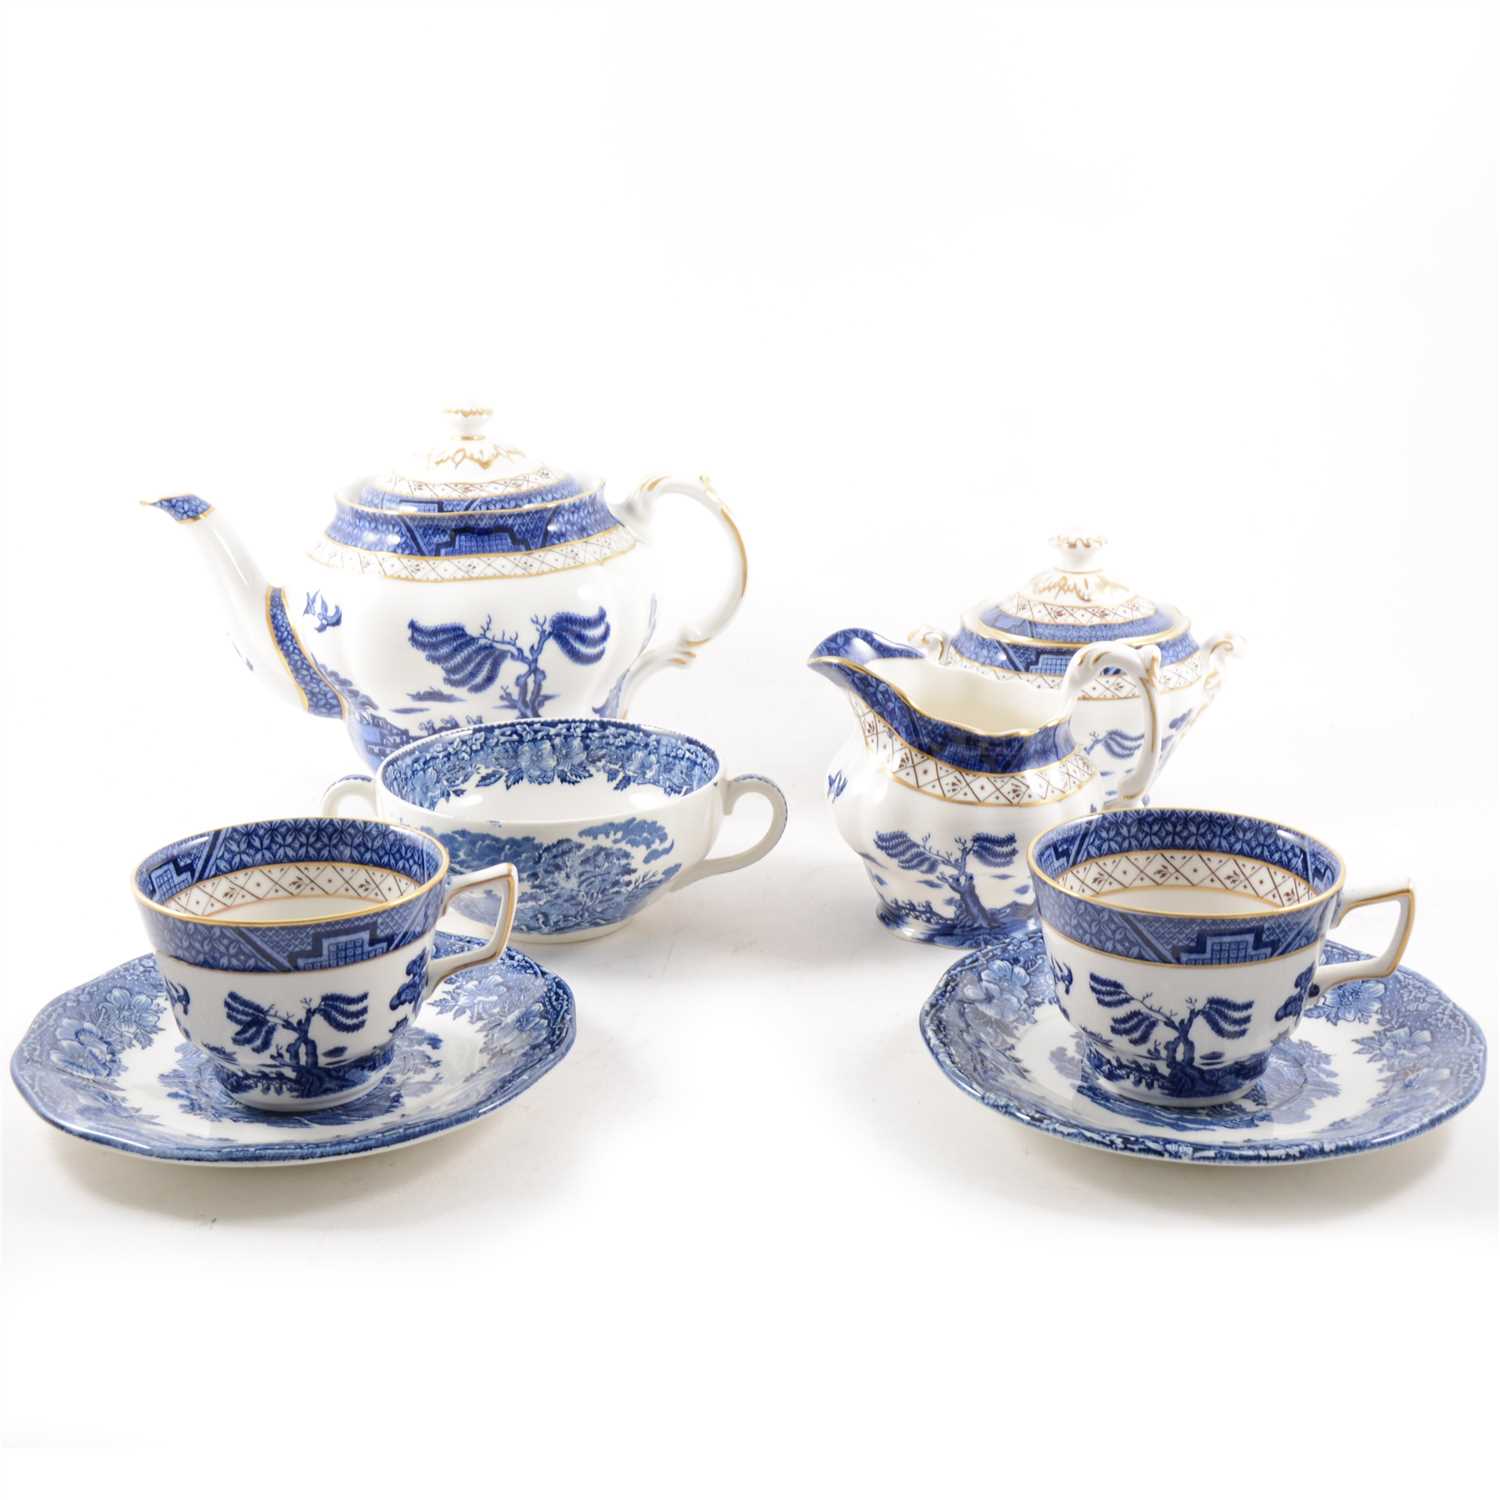 Lot 59 - Booths "Real Old Willow" tea service